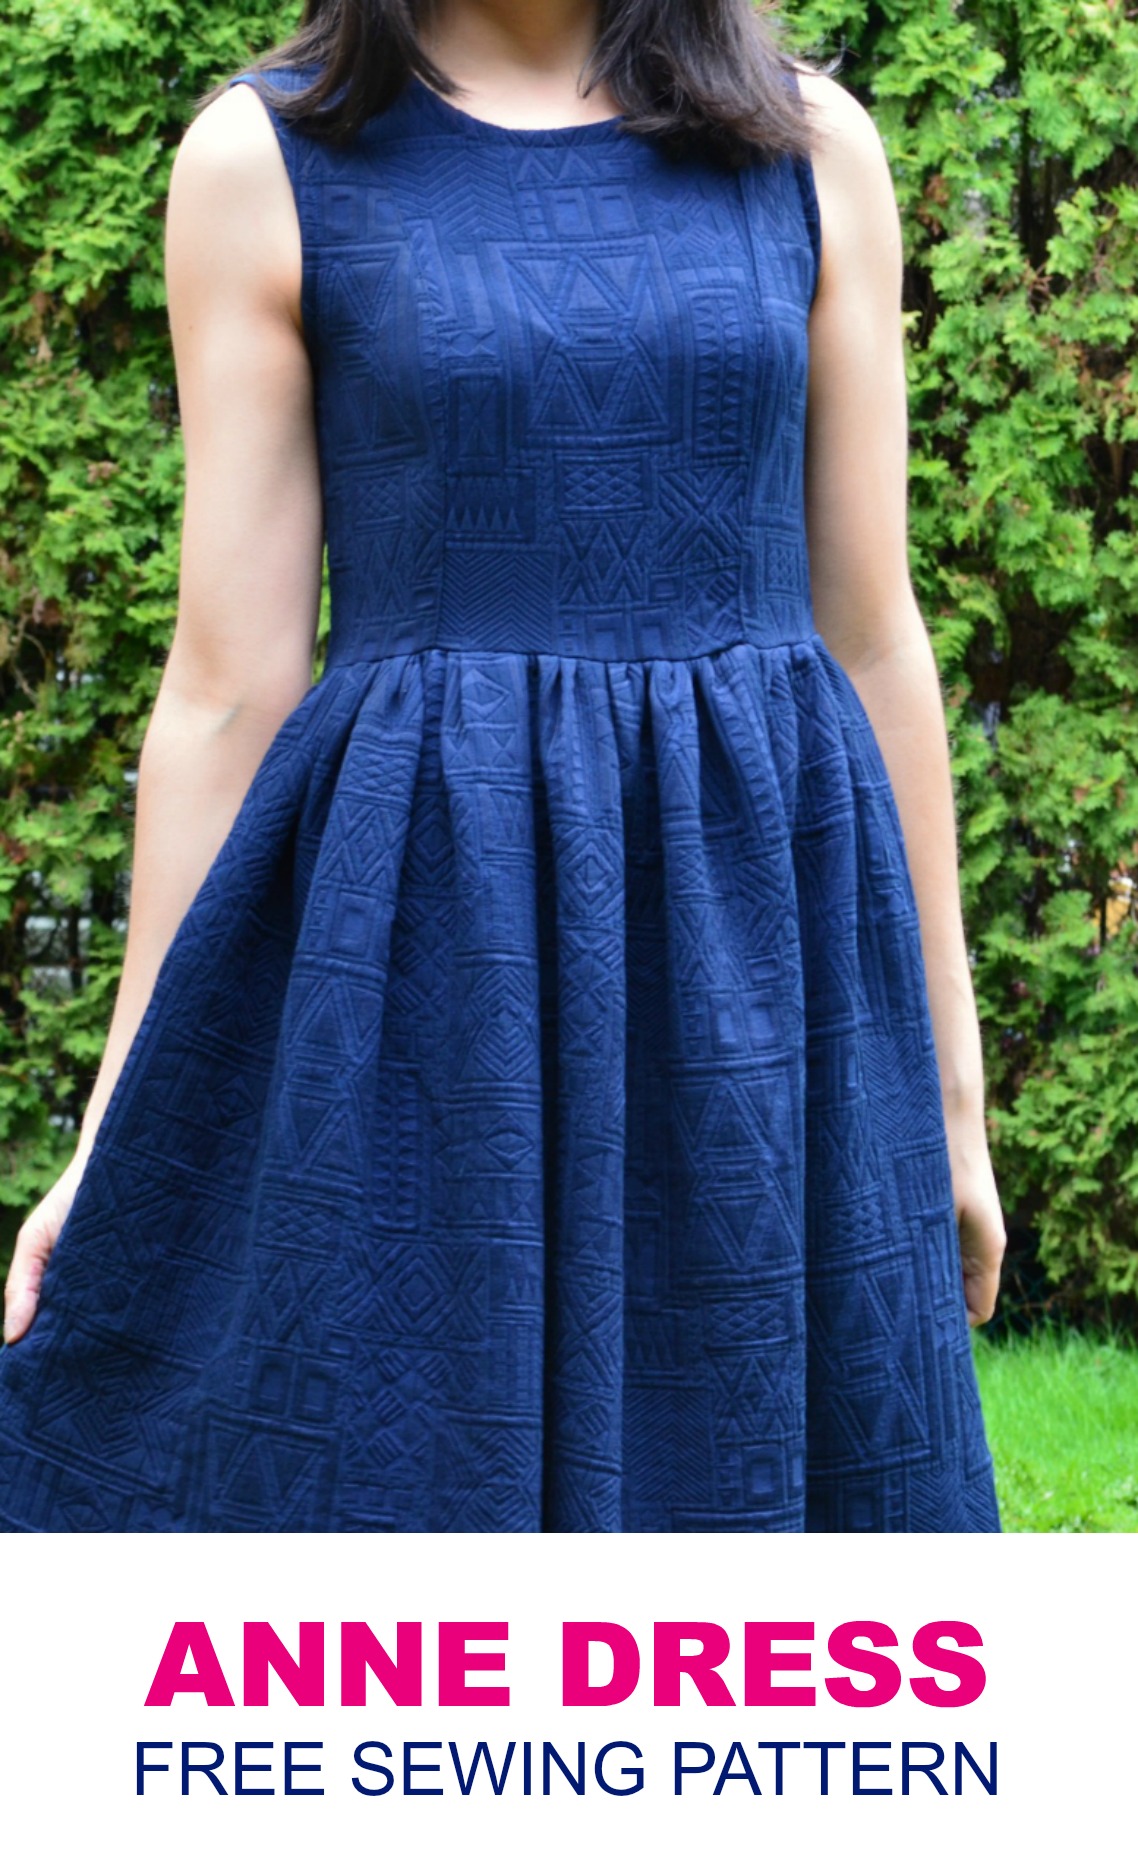 SEWING TUTORIAL: how to make the Anne dress Pattern